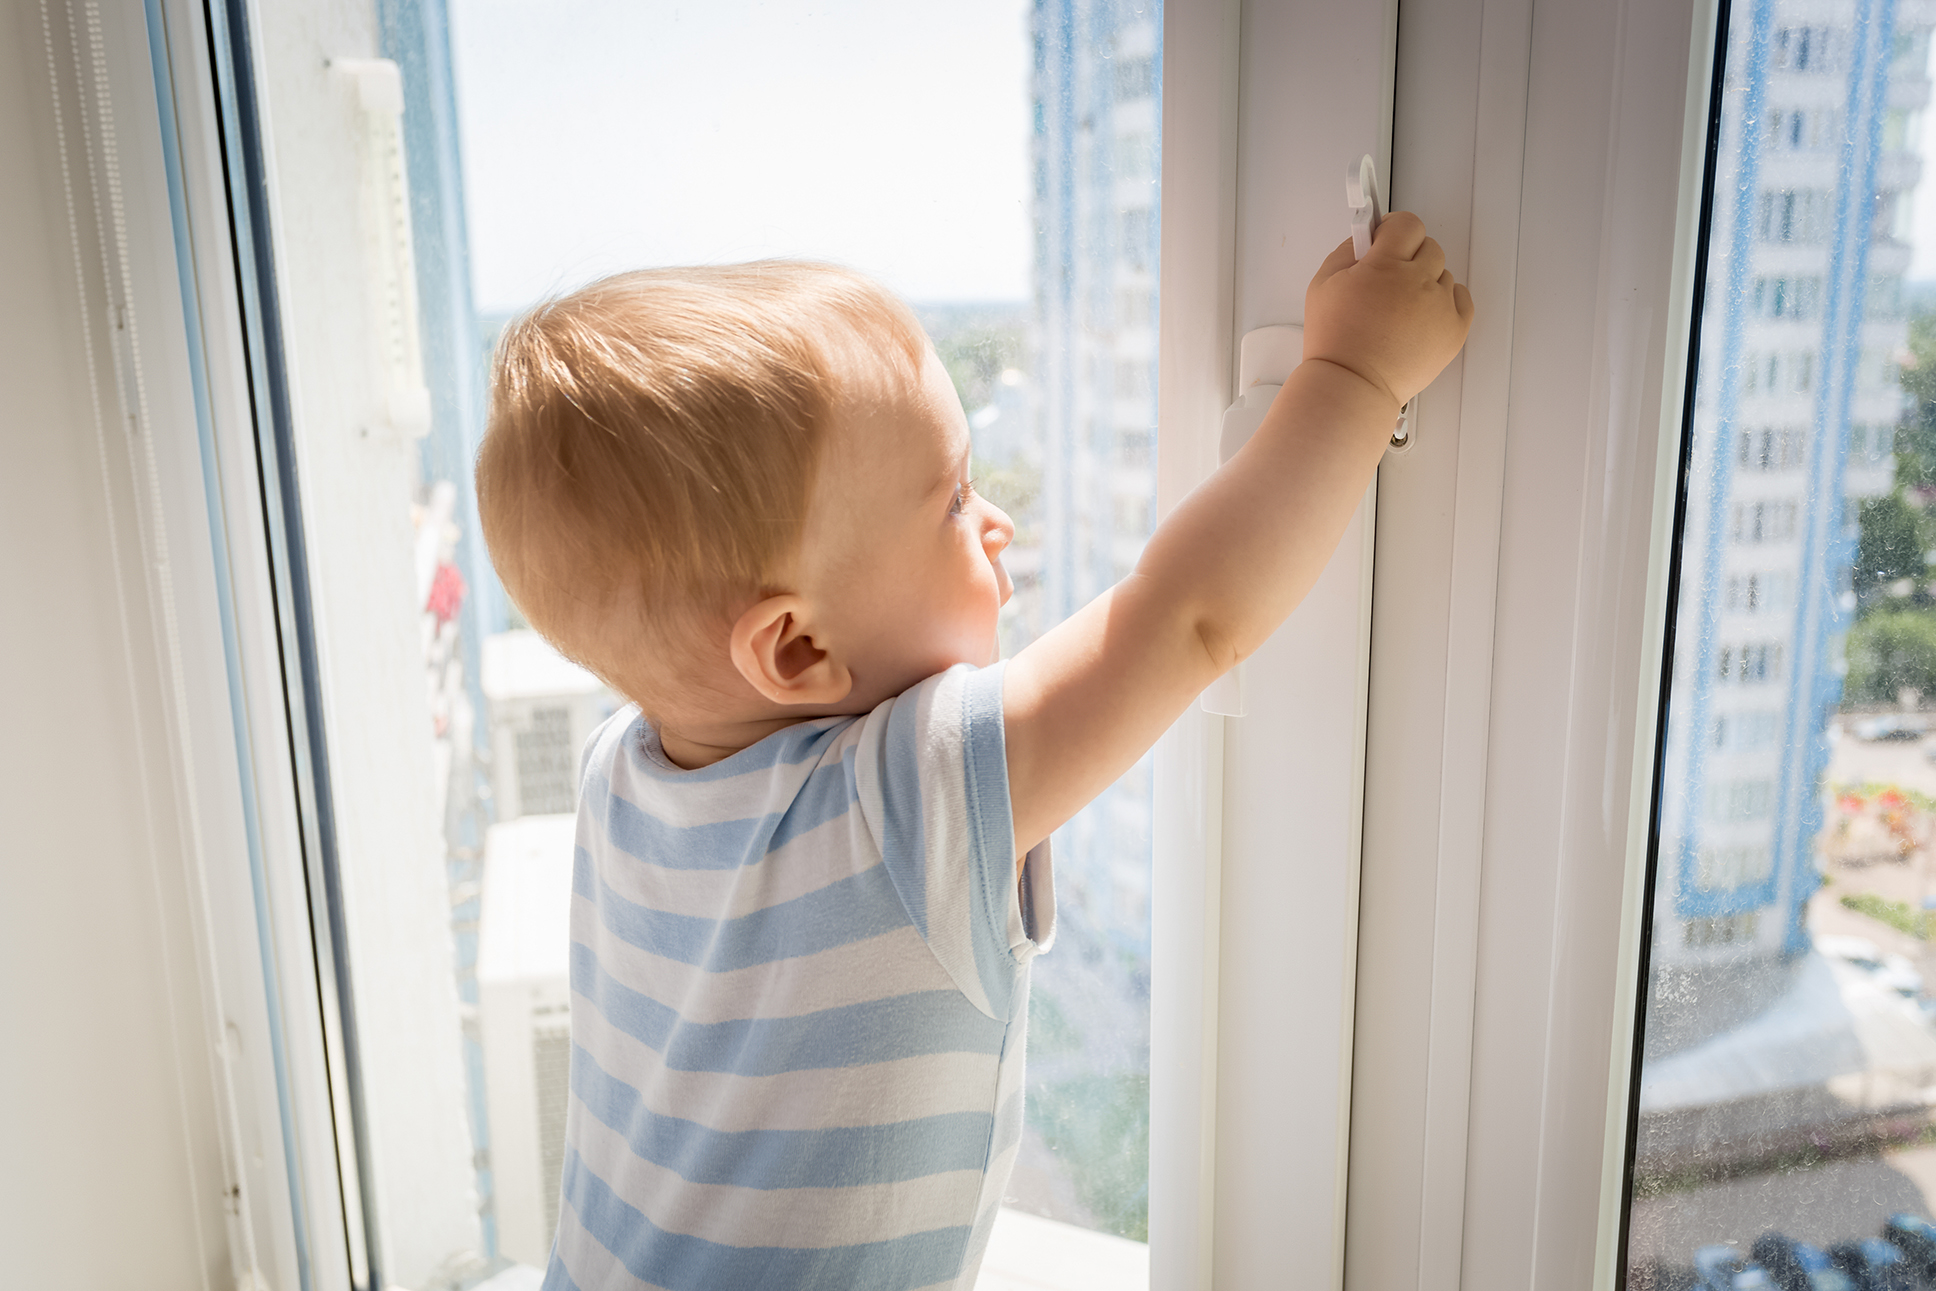 Child Safety Restrictors | Window Safety Devices